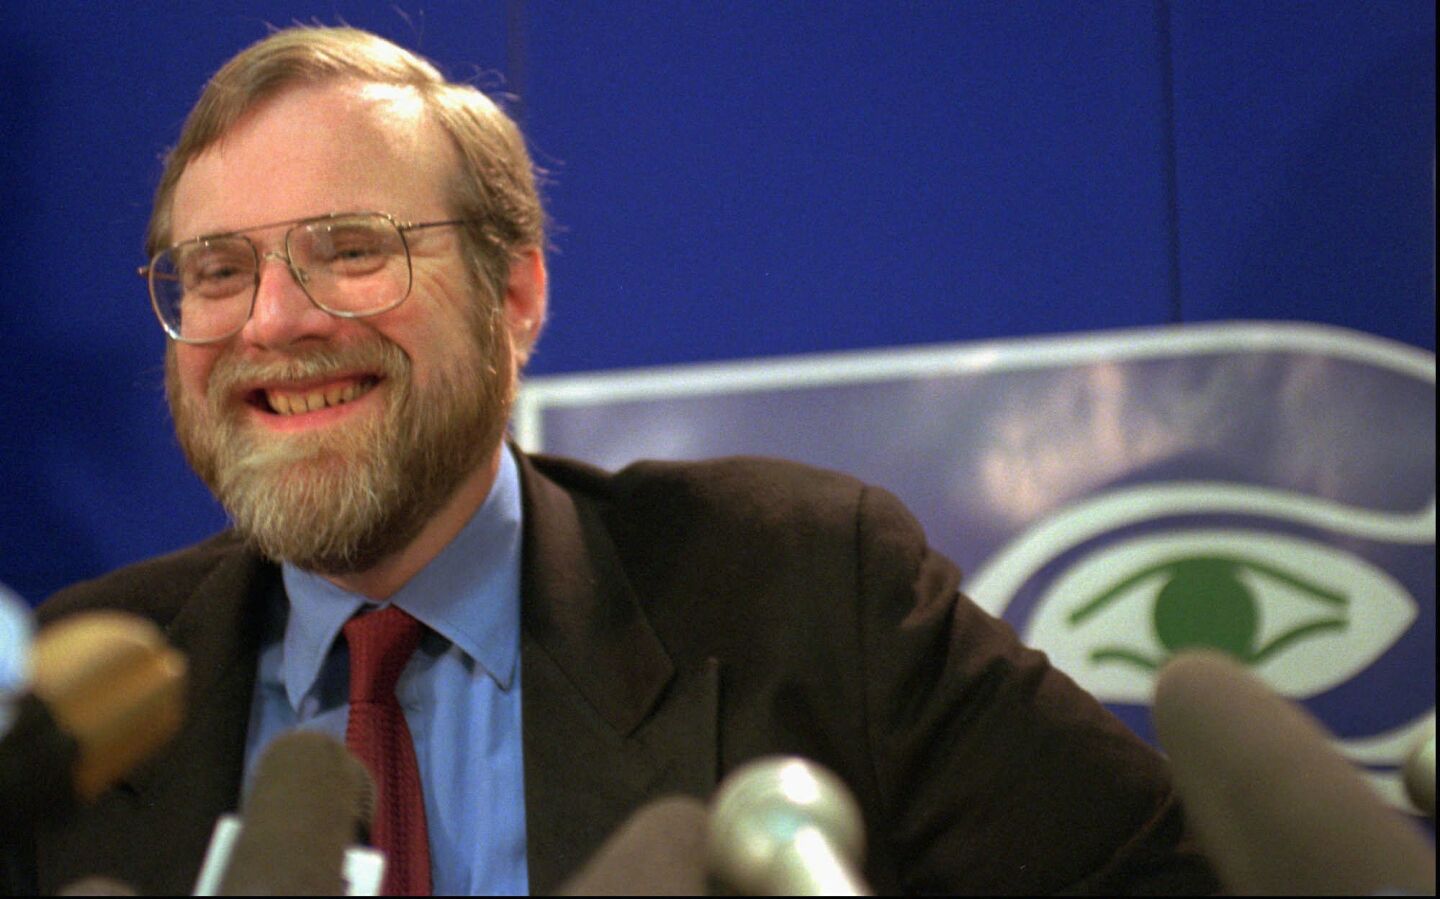 Paul Allen at Seattle Seahawks headquarters in Kirkland, Wash., on April 23, 1996. The eye of the team logo peers over his shoulder.